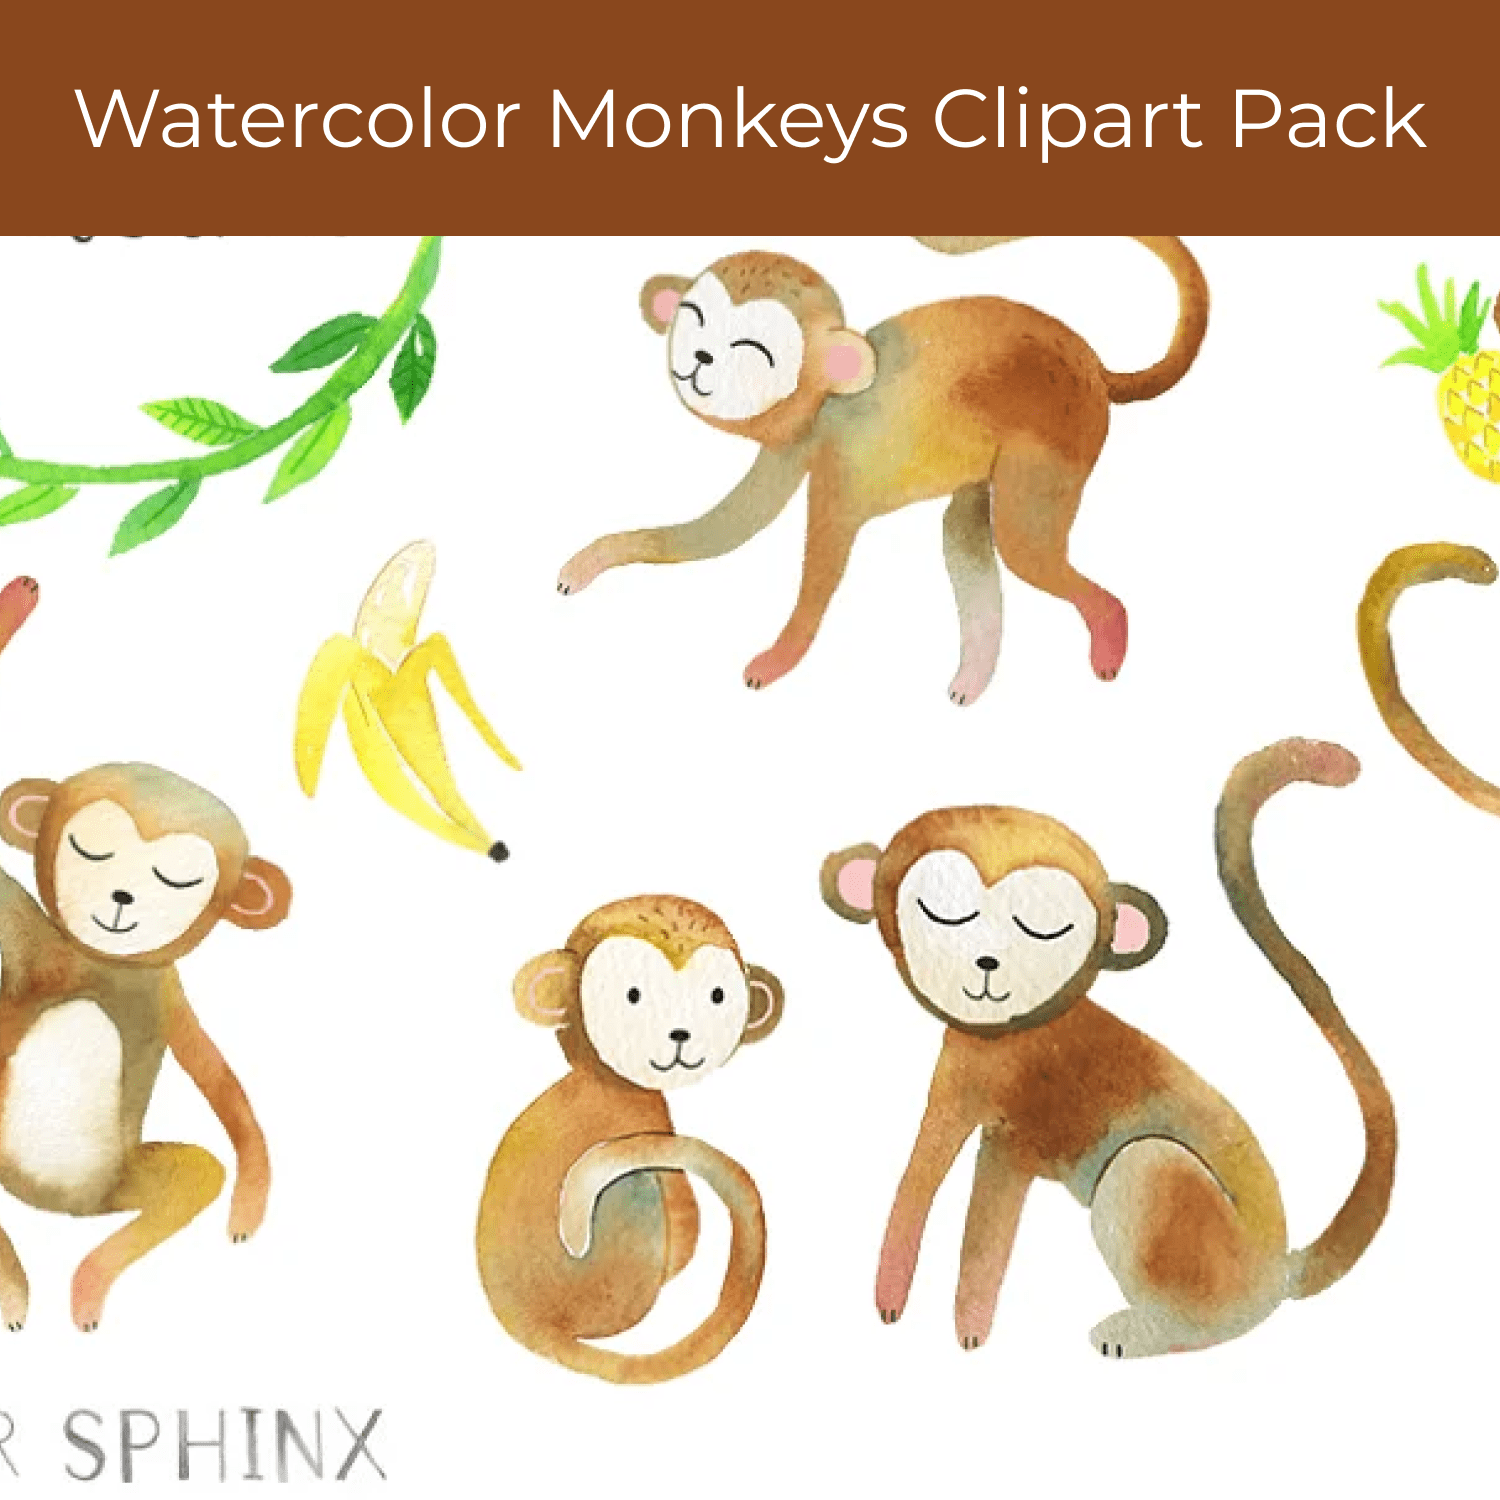 Watercolor Monkeys Clipart Pack cover.